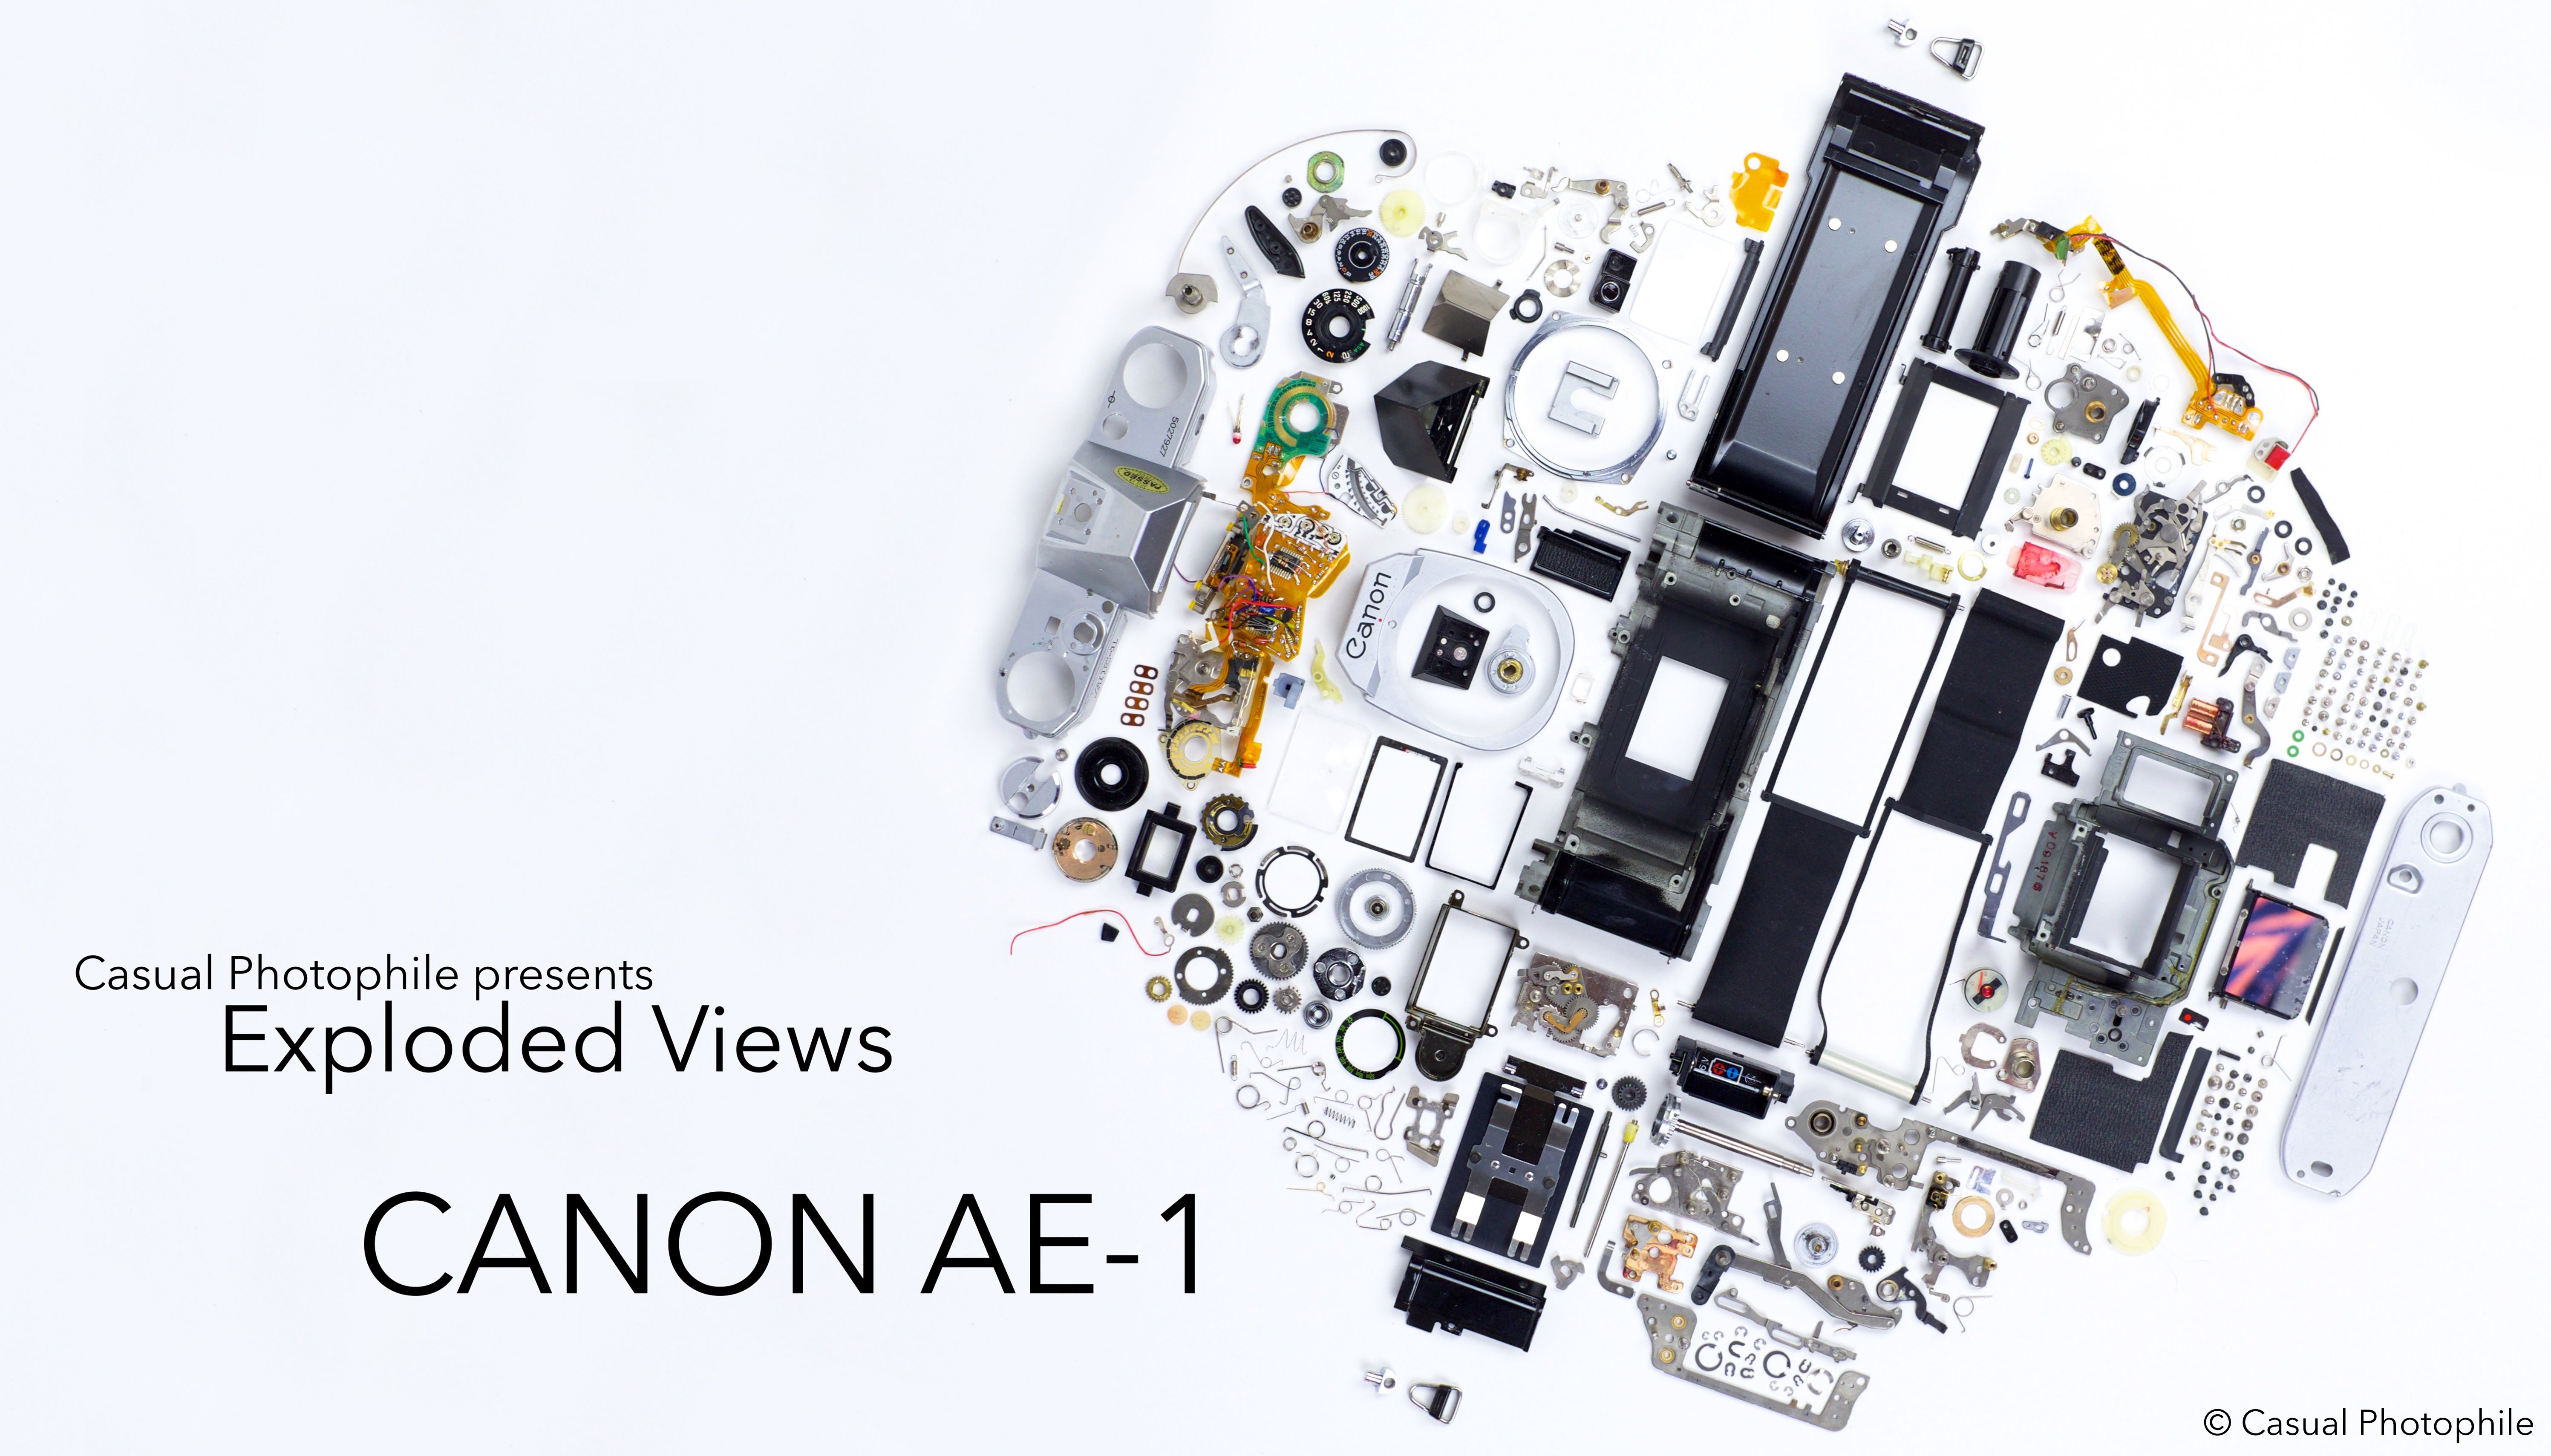 Part Of Our Exploded Views Feature, Here's A Canon AE 1